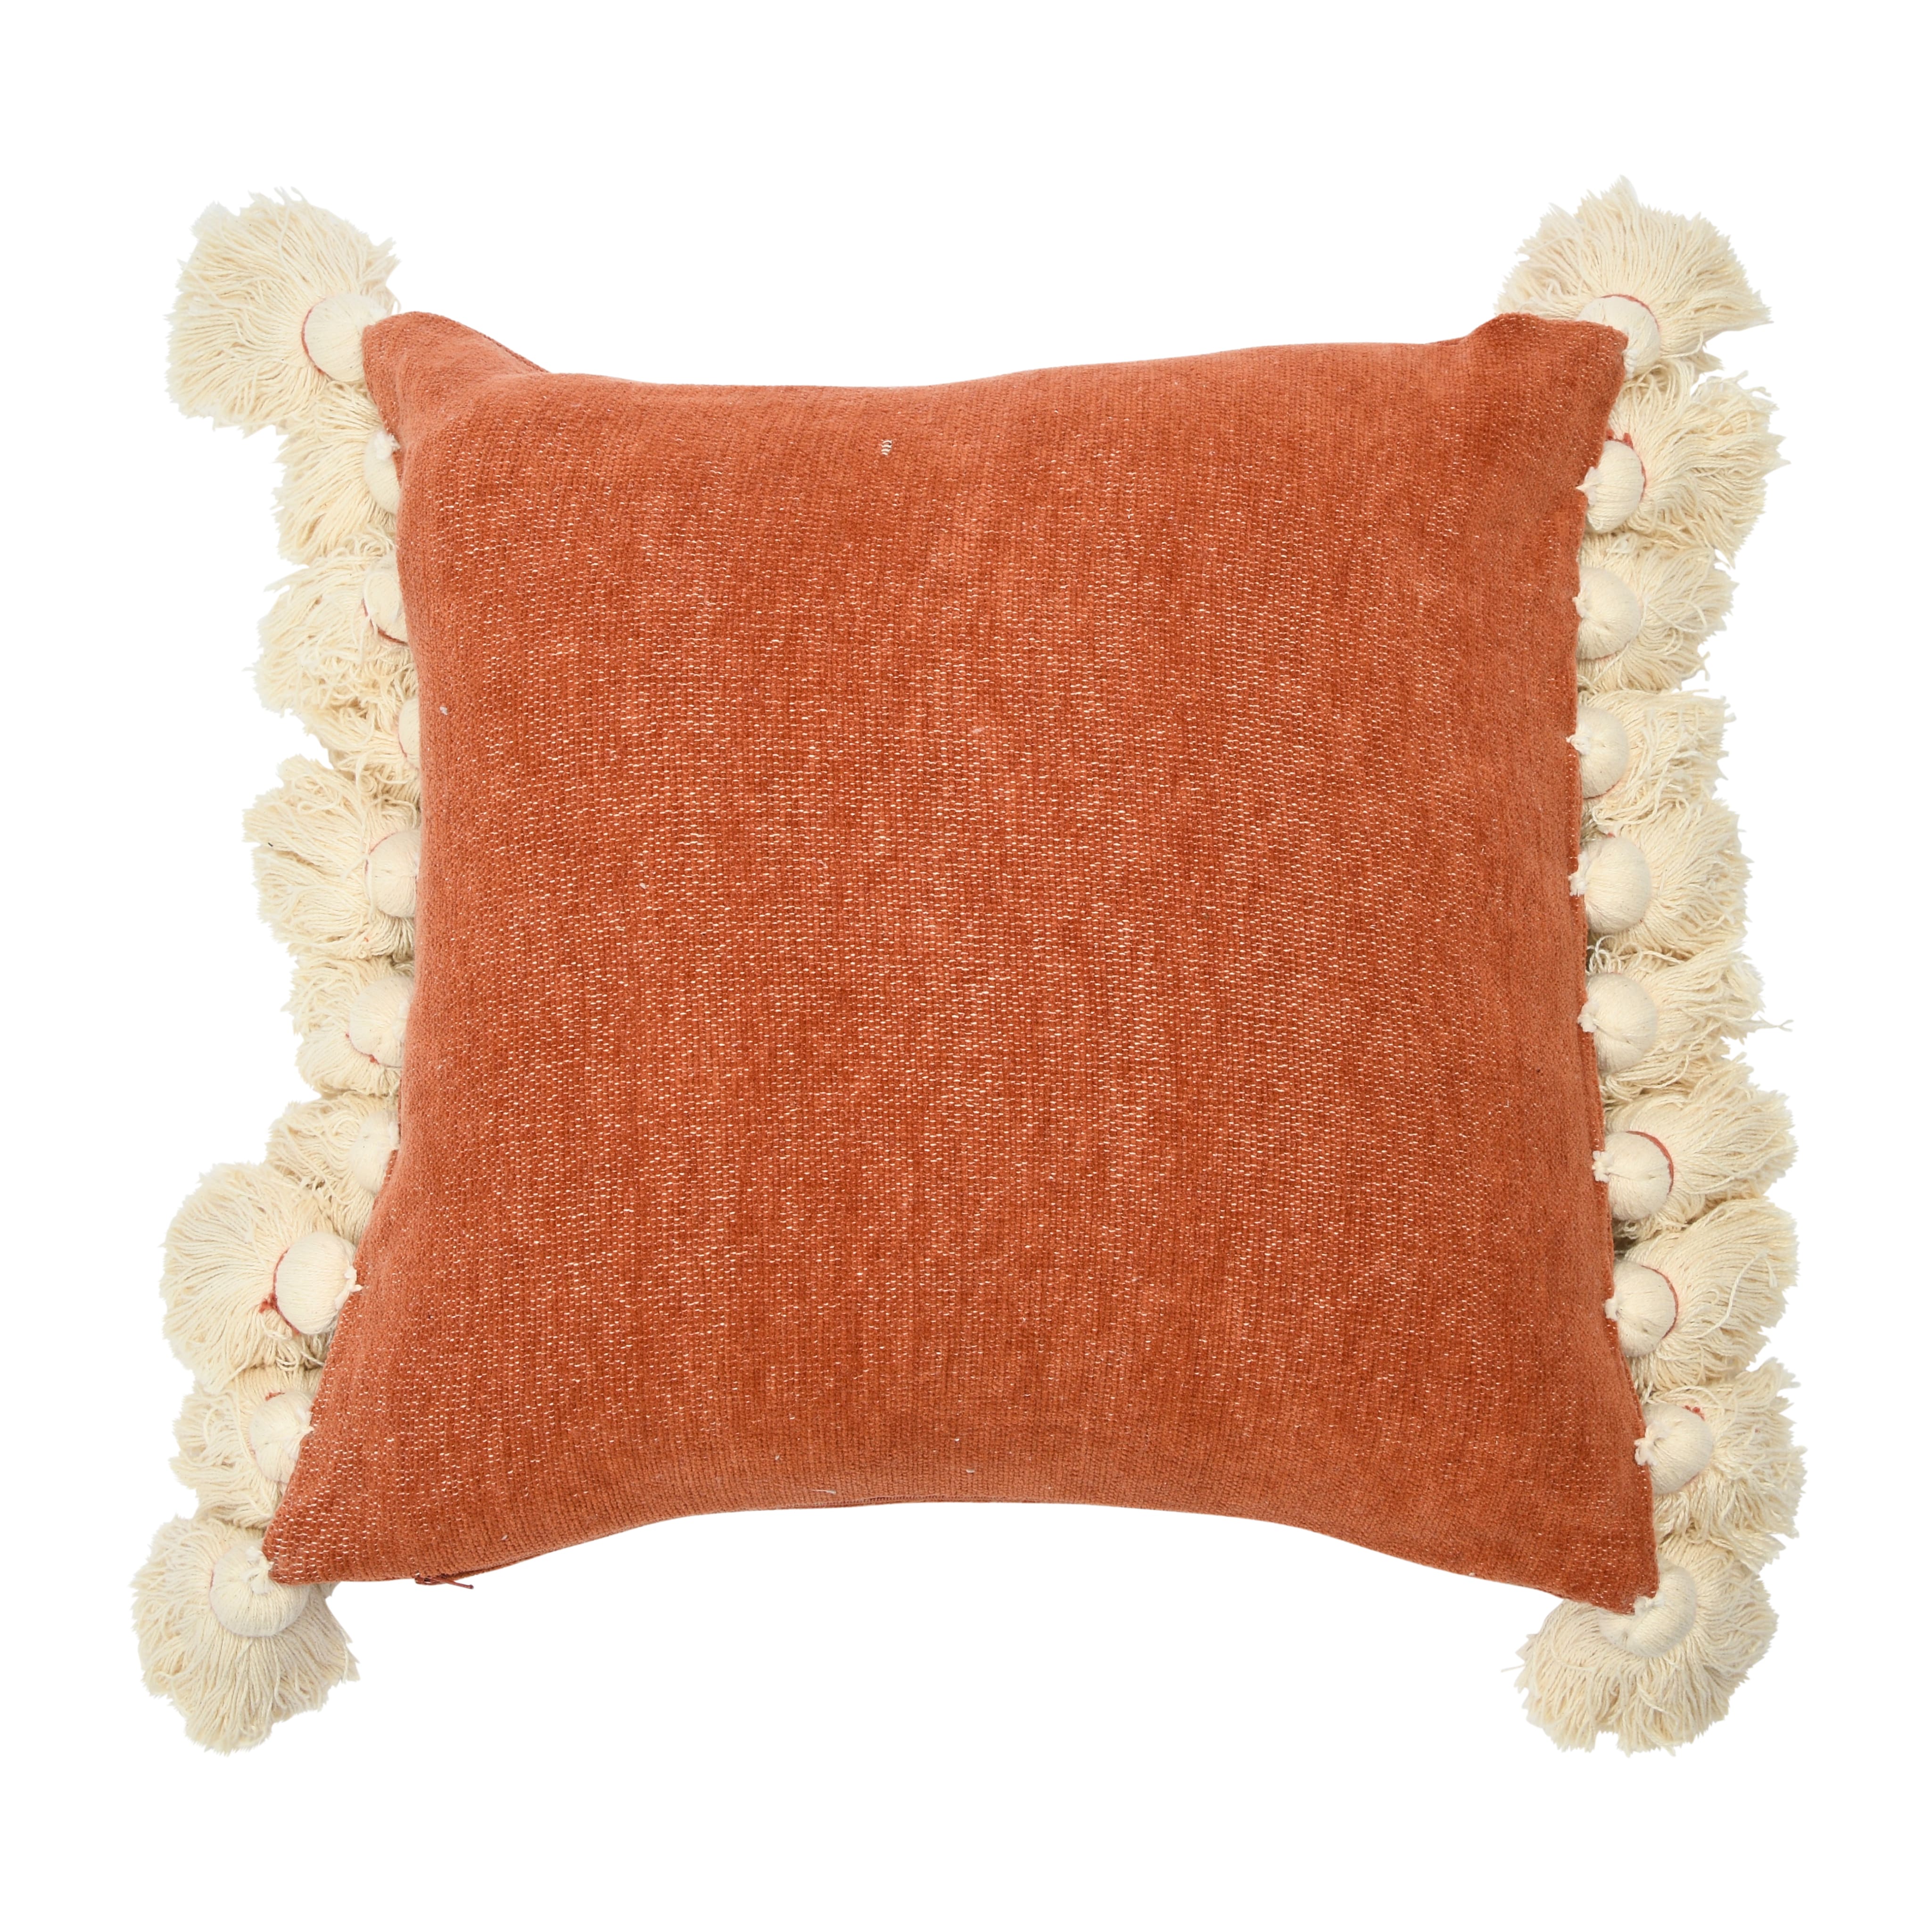 Cotton Chenille Lumbar Pillow with Tassels